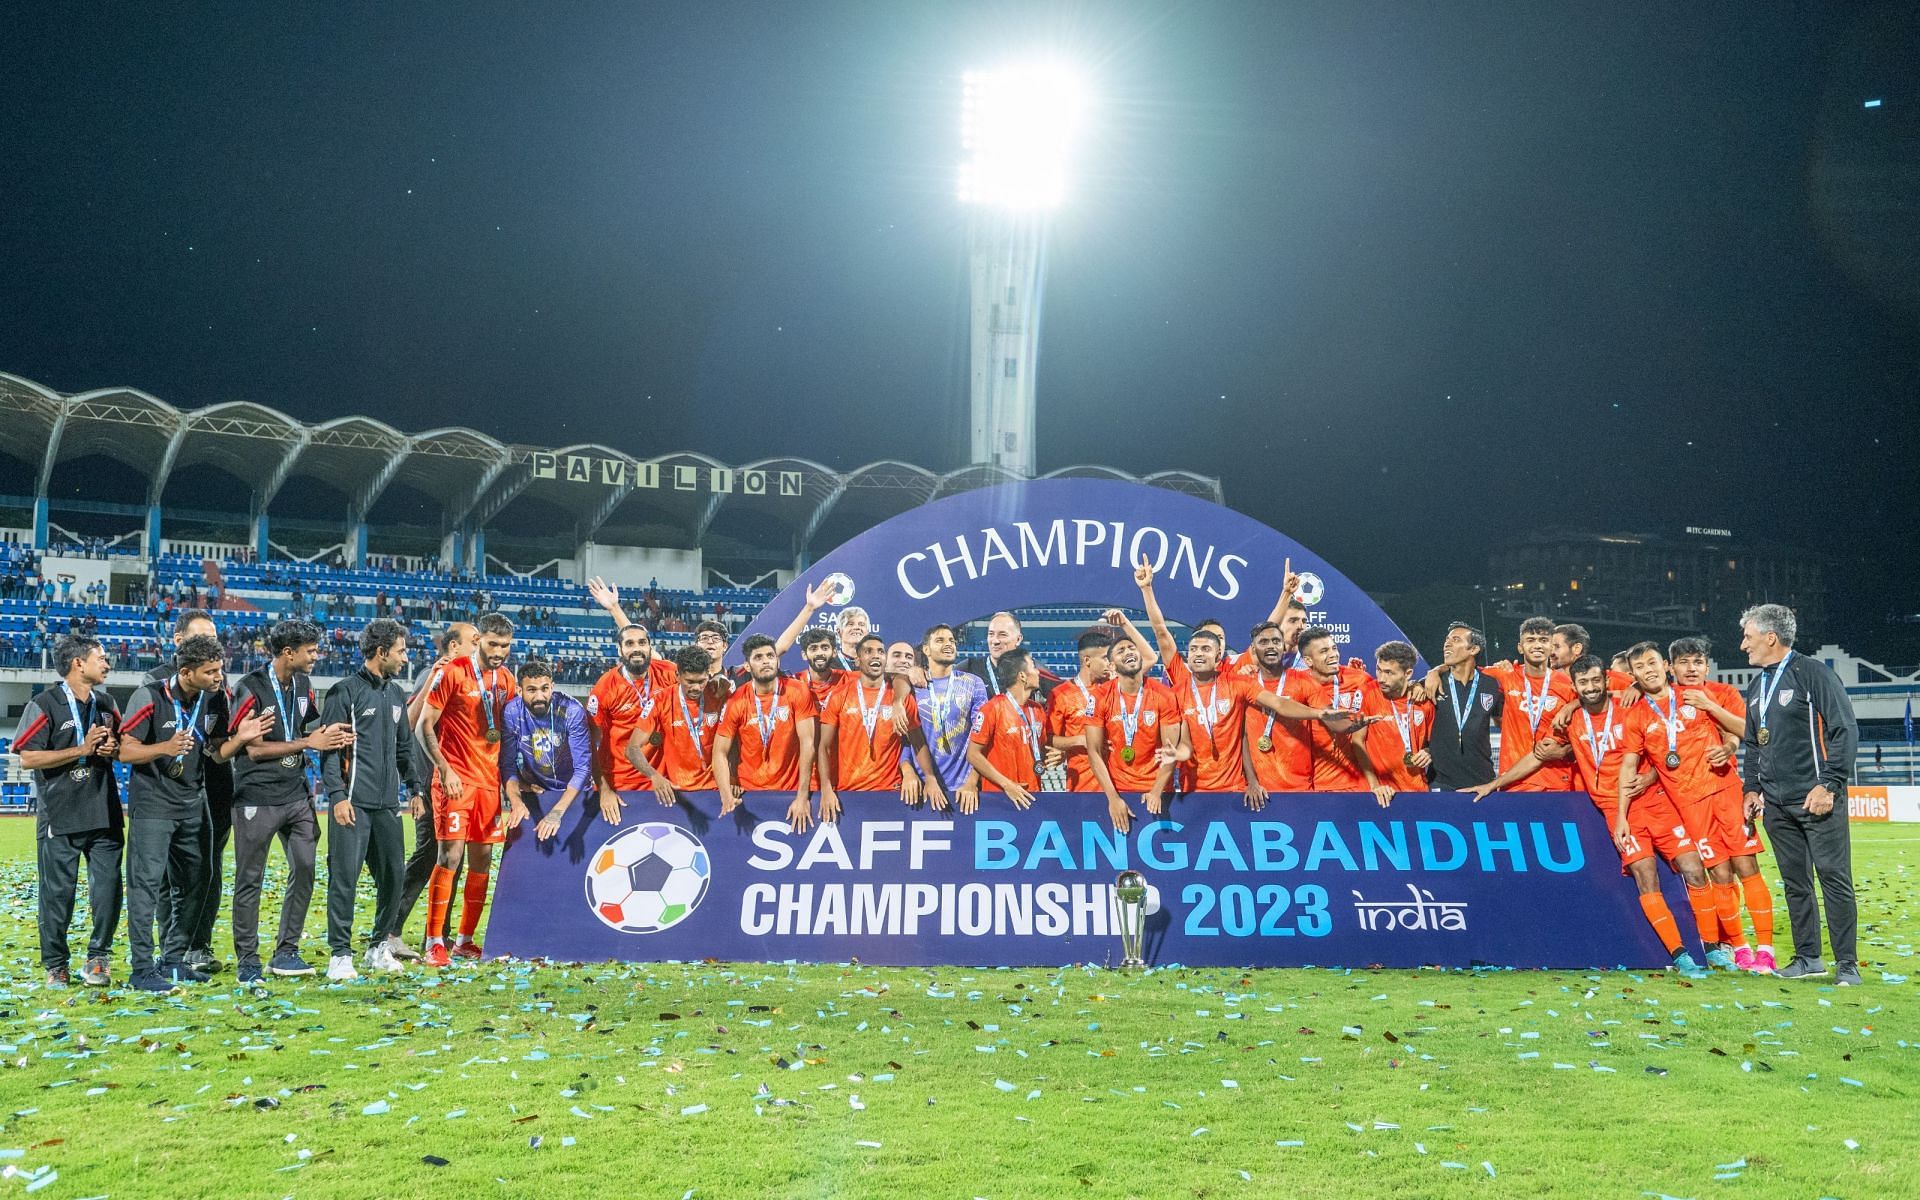 Udanta Singh (far right) and the Indian team celebrate their SAFF Championship 2023 victory. [Credits: AIFF]